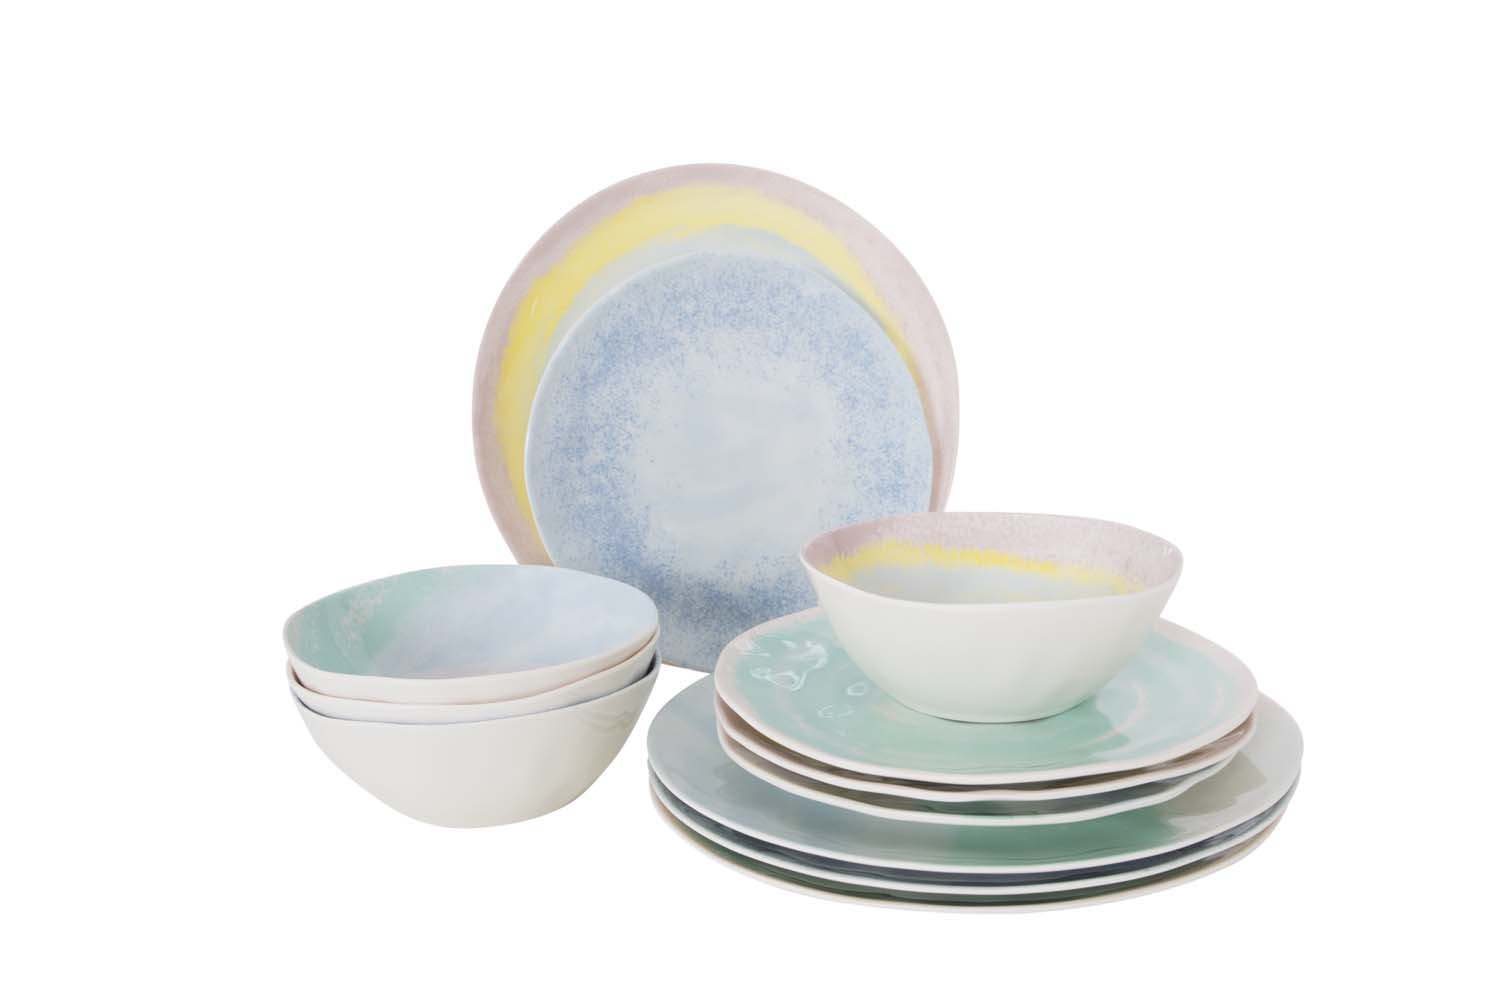 6181371 A cheerfull 12-part tableware set of the Pastel collection. The tableware is made of 100% melamine. Melamine dinnerware is virtually unbreakable and very lightweight. In addition, the crockery is scratch resistant and dishwasher safe. This stylish set is suitable for 4 people and consists of 4 breakfast plates, 4 dinner plates and 4 bowls.